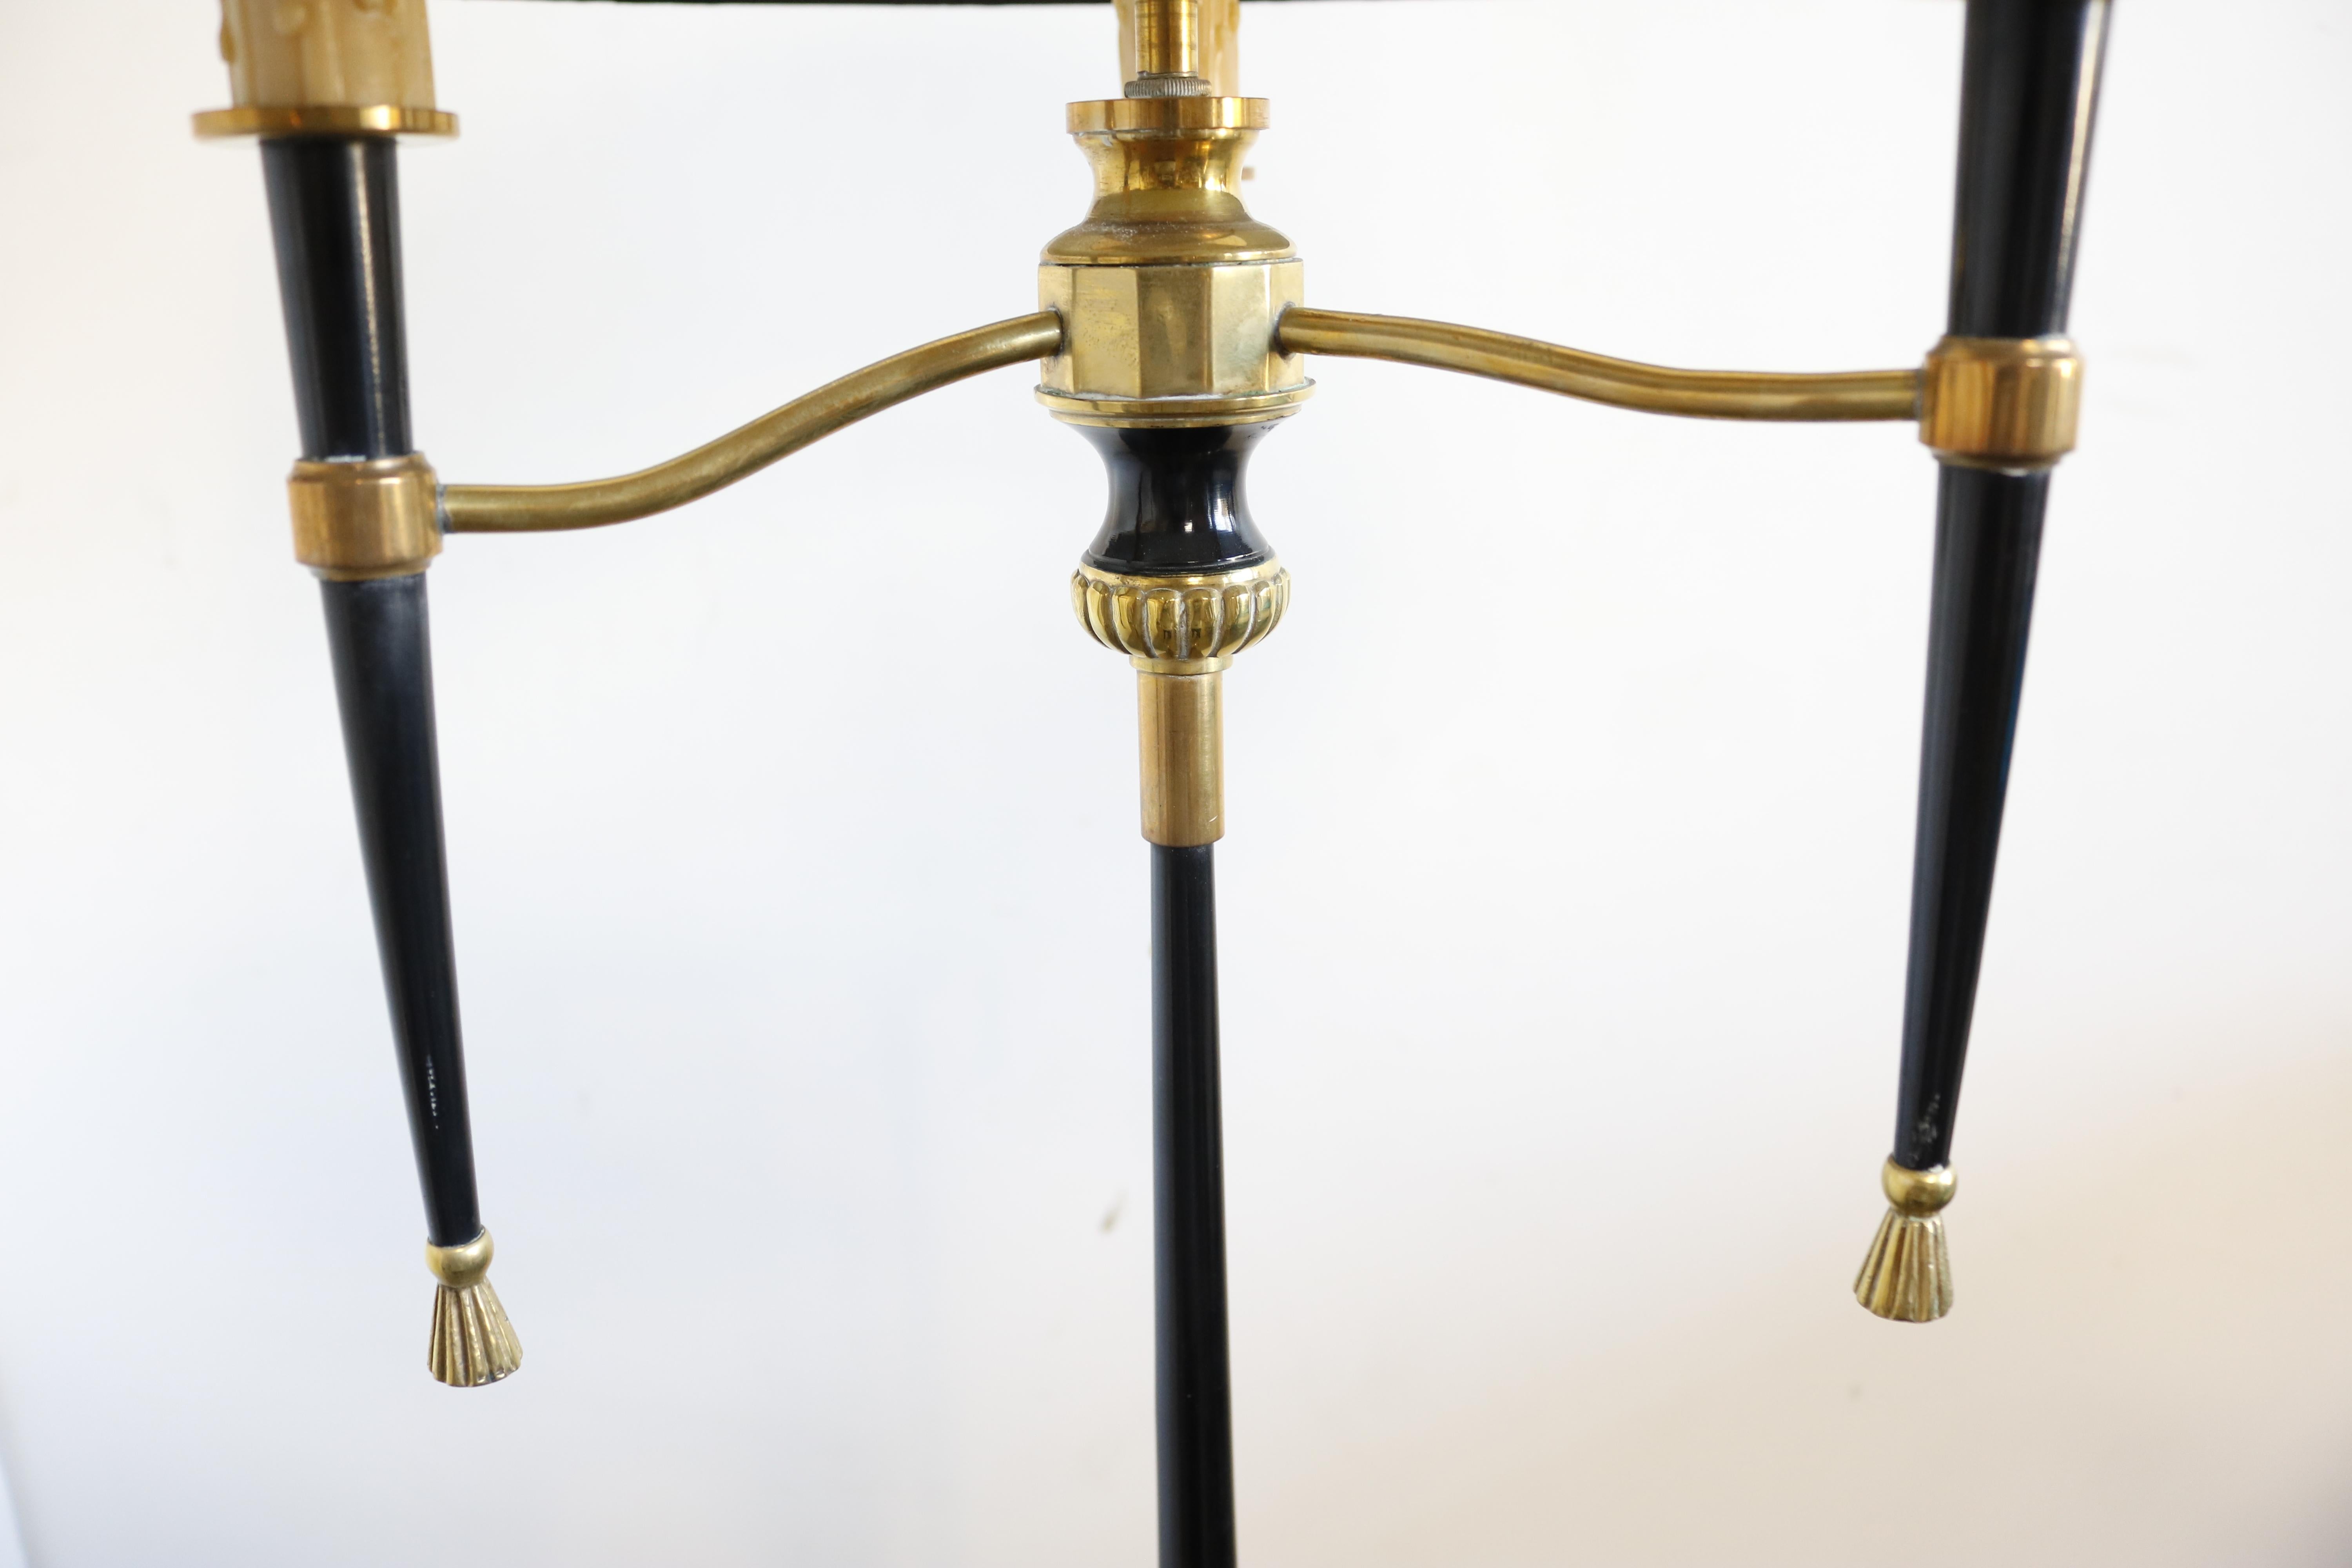 This 1950s floor lamp from France features a brass base, supporting a thin black column decorated at the middle with brass rosettes. At the top, a trio of faux candles on tapered holders provides space for three lightbulbs, encased by a custom-made